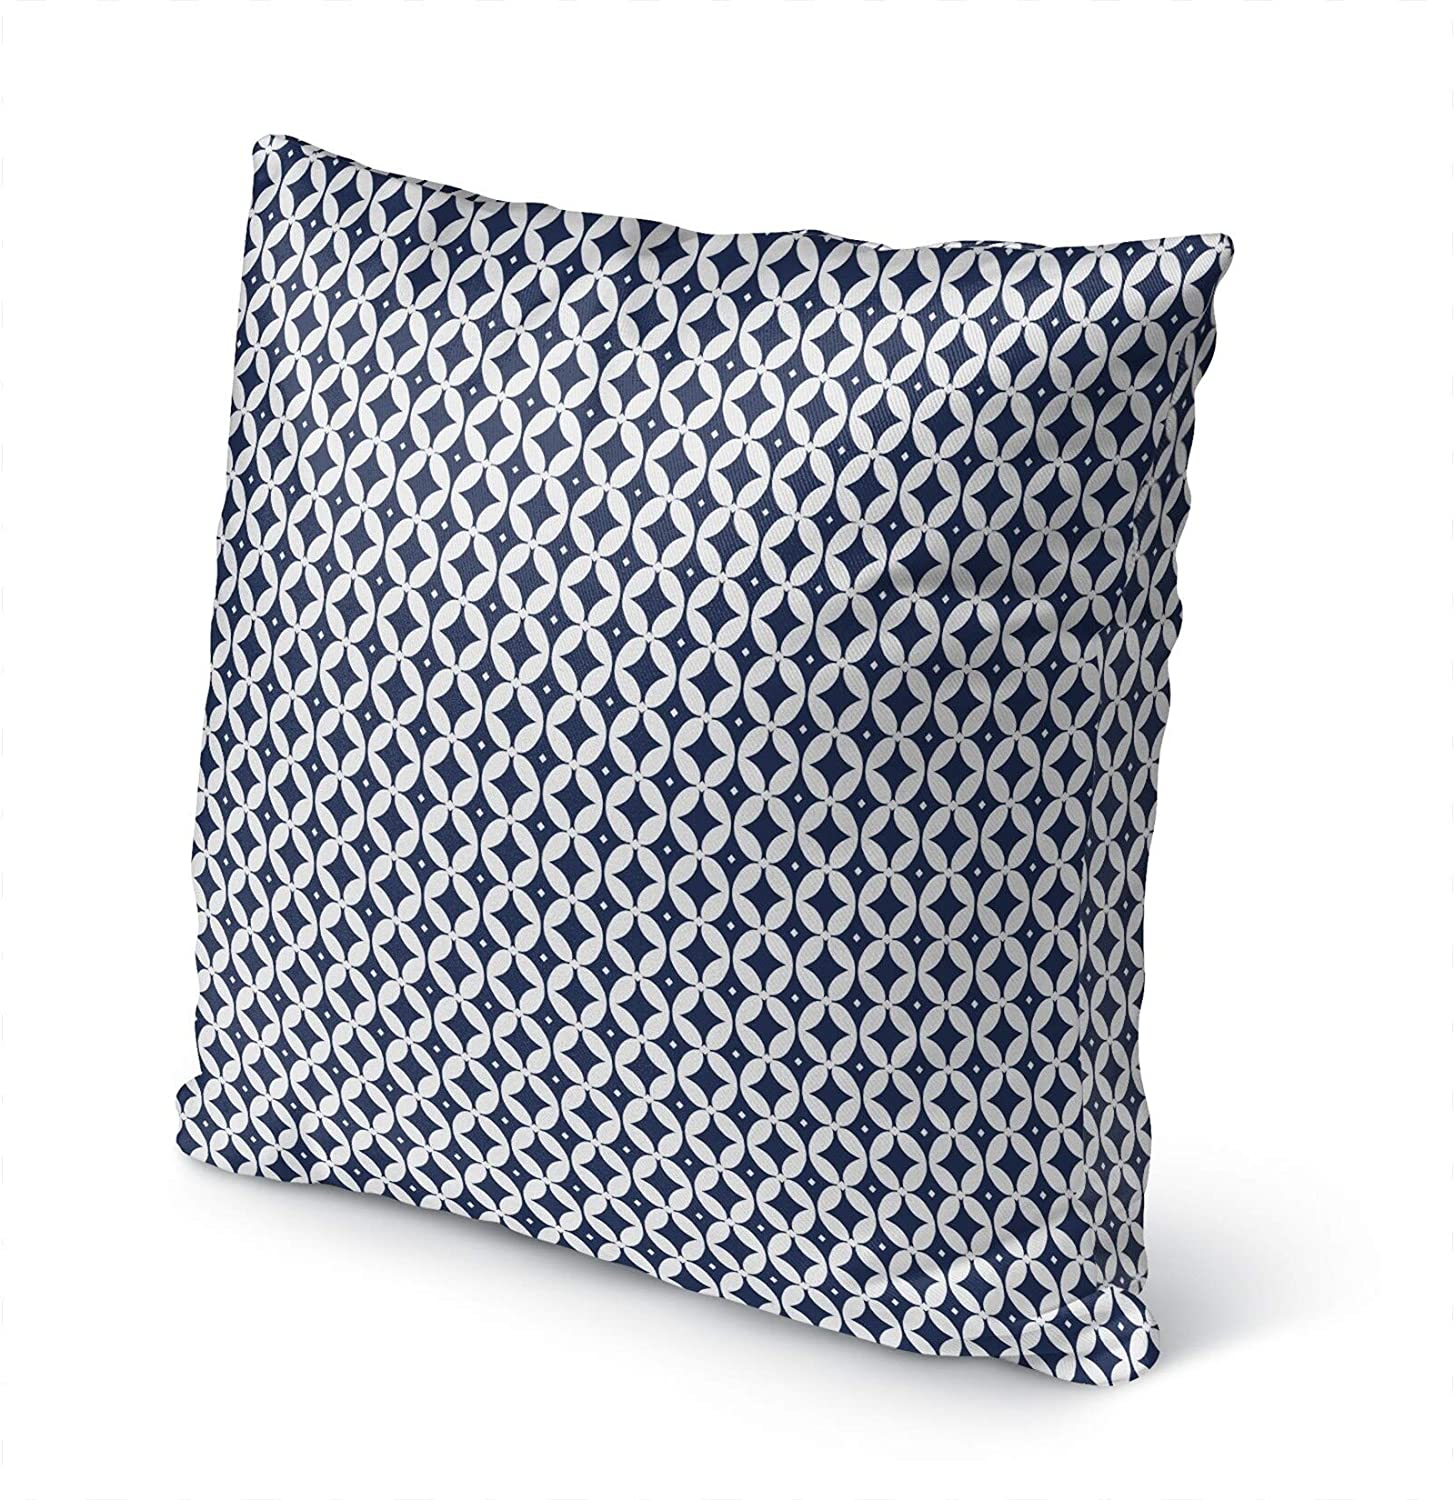 Navy Indoor|Outdoor Pillow by 18x18 Blue Geometric Modern Contemporary Polyester Removable Cover